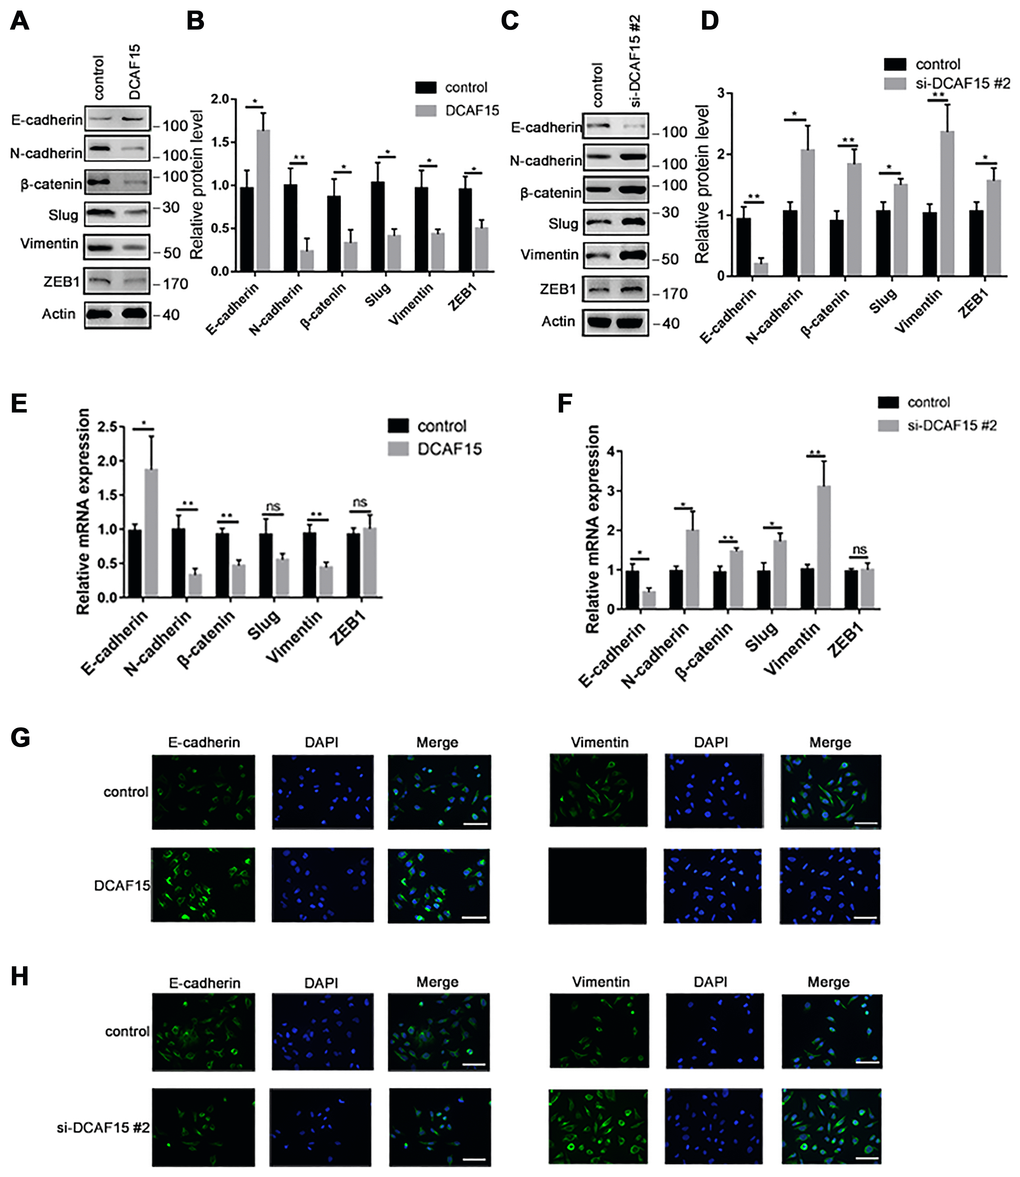 DCAF15 inhibits epithelial-mesenchymal transition (EMT) of HCC cells. (A–B) Western blot analysis showed the protein level of EMT markers after transfecting with control or DCAF15 overexpression plasmids in HCC cells. (C–D) Western blot analysis showed the protein level of EMT markers after transfecting with control or DCAF15 siRNA in HCC cells. (E) qRCR analysis showed relative mRNA level of EMT markers after transfecting with control or DCAF15 overexpression plasmids in HCC cells. (F) qRCR analysis showed relative mRNA level of EMT markers after transfecting with control or DCAF15 siRNA in HCC cells. (G) Protein level of E-cadherin and vimentin after transfecting with control or DCAF15 overexpression plasmids in HCC cells was visualized by fluorescence microscopy. Scale bars, 100 μm. (H) Protein level of E-cadherin and vimentin after transfecting with control or DCAF15 siRNA in HCC cells was visualized by fluorescence microscopy. Scale bars, 100 μm.